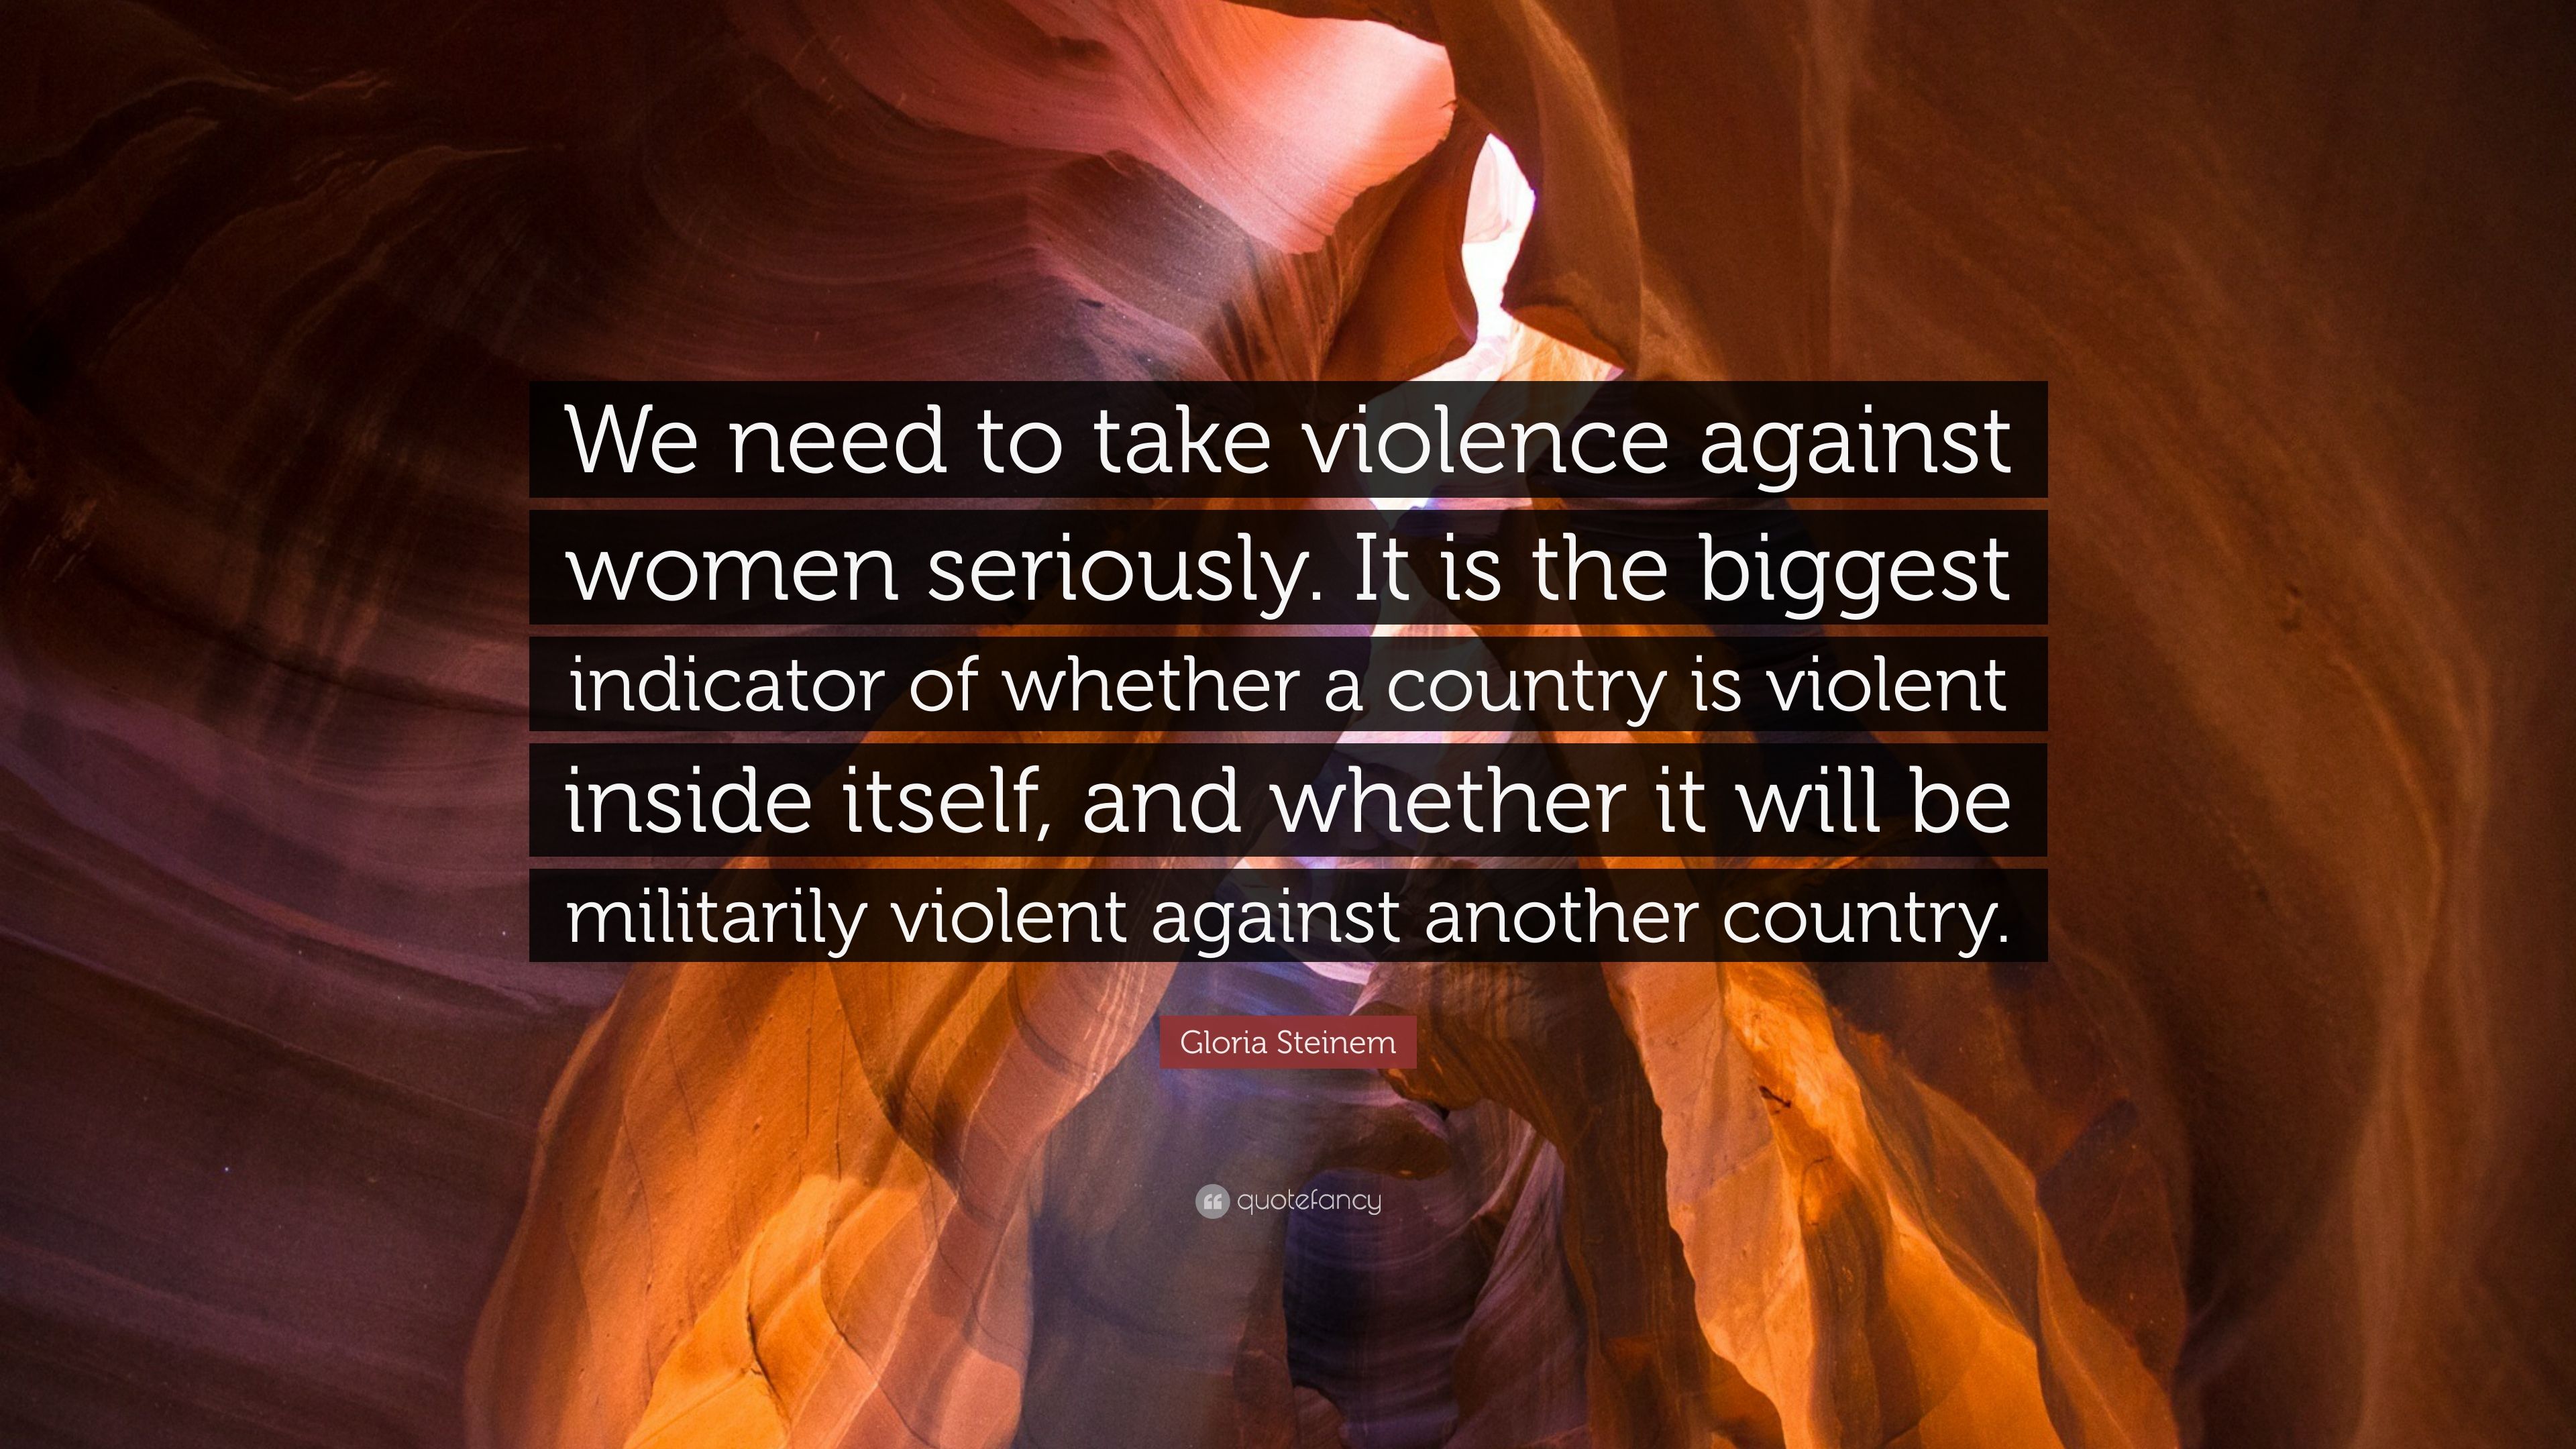 Gloria Steinem Quote: “We need to take violence against women